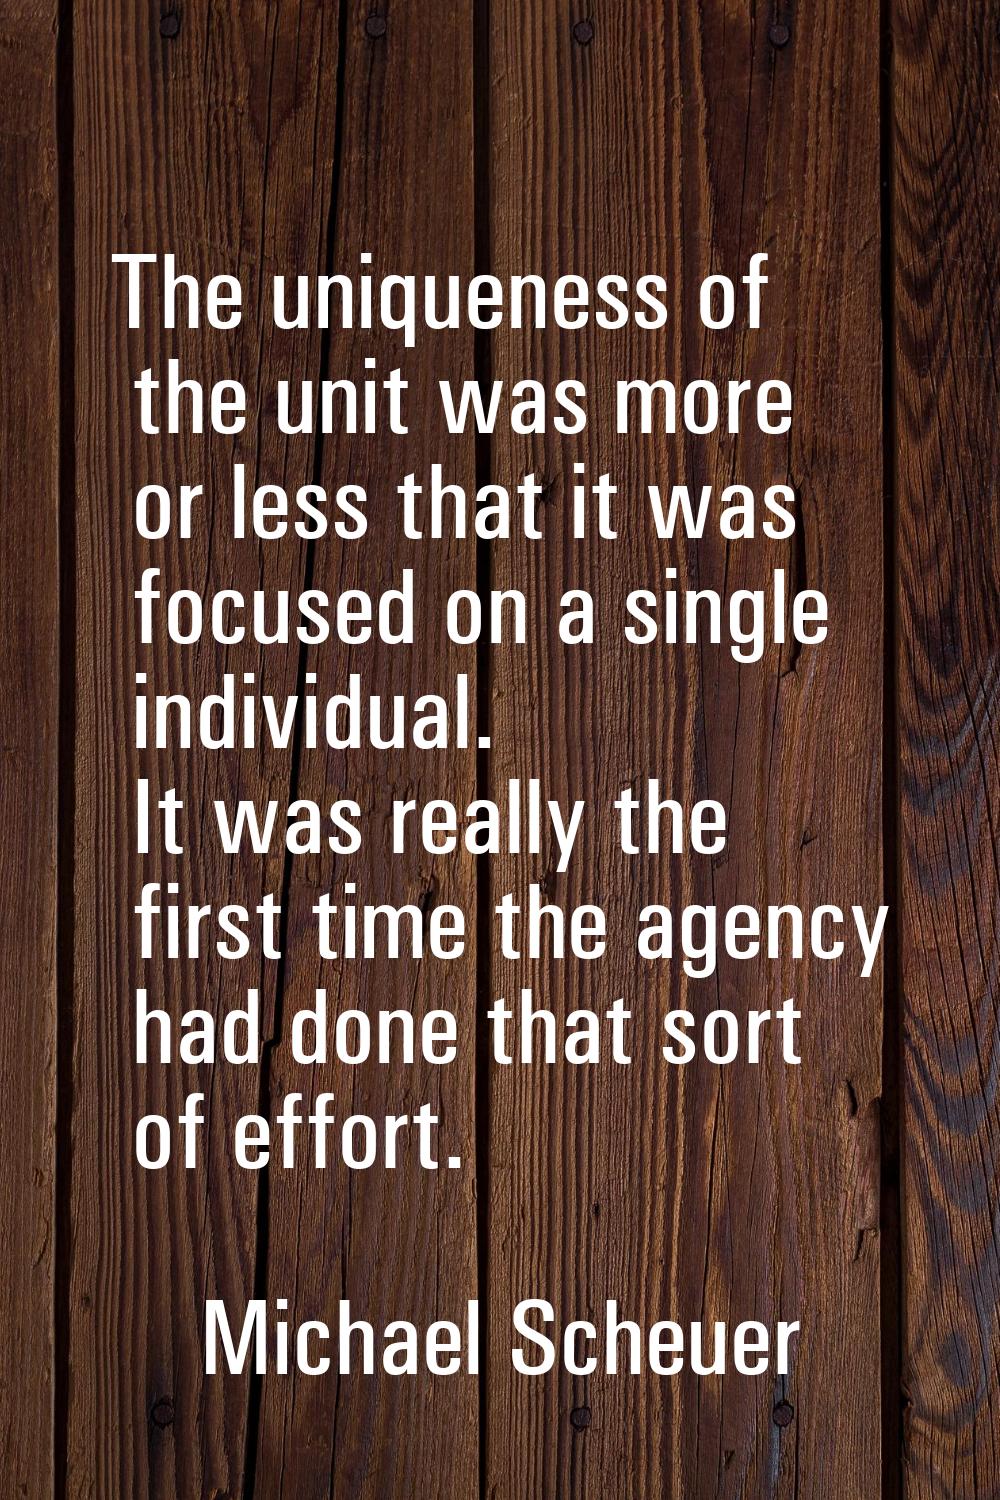 The uniqueness of the unit was more or less that it was focused on a single individual. It was real